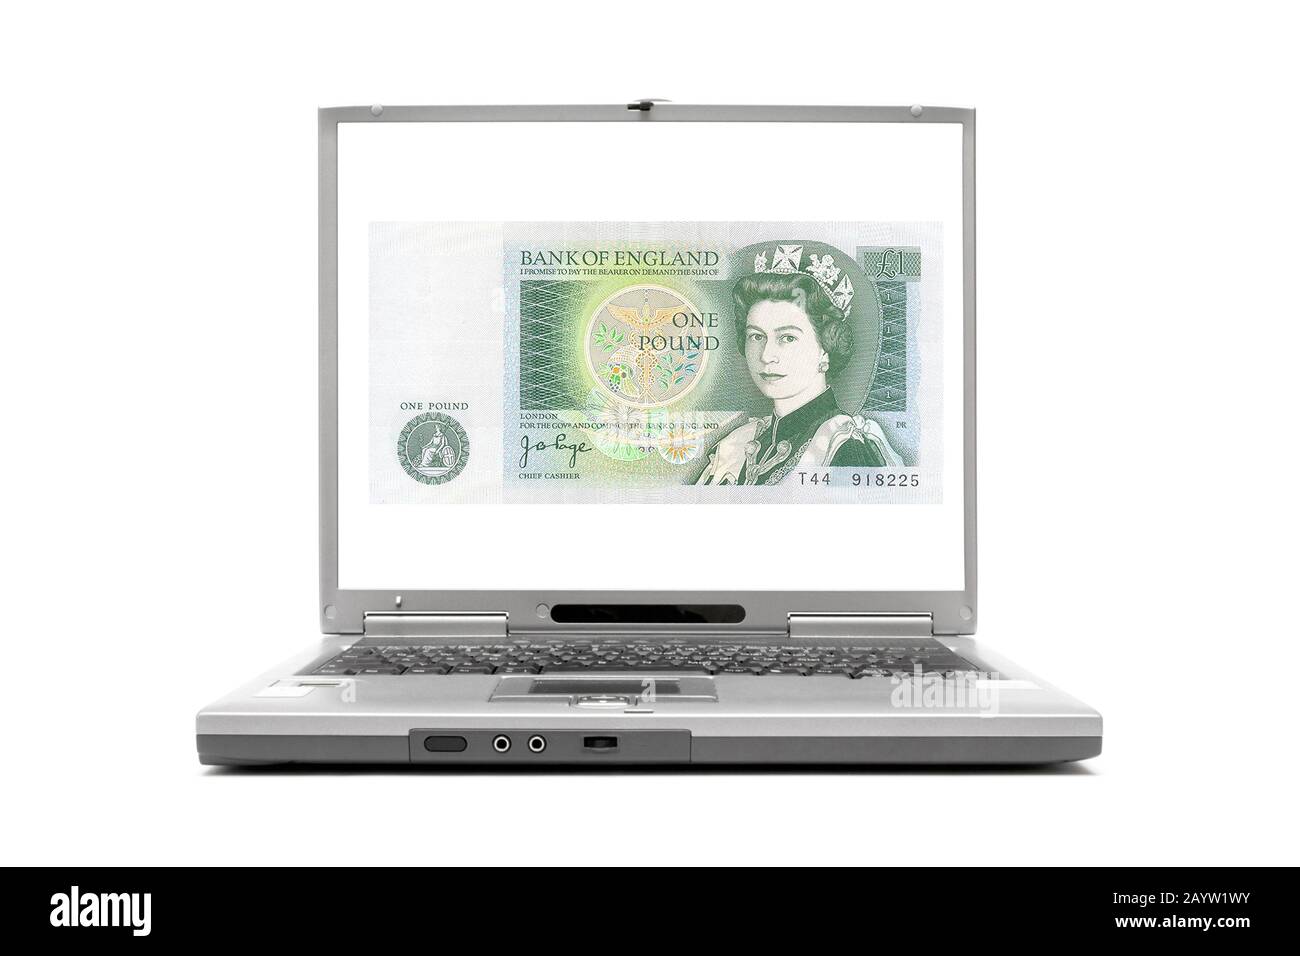 laptop showing a 1 britisch pound on the display Stock Photo